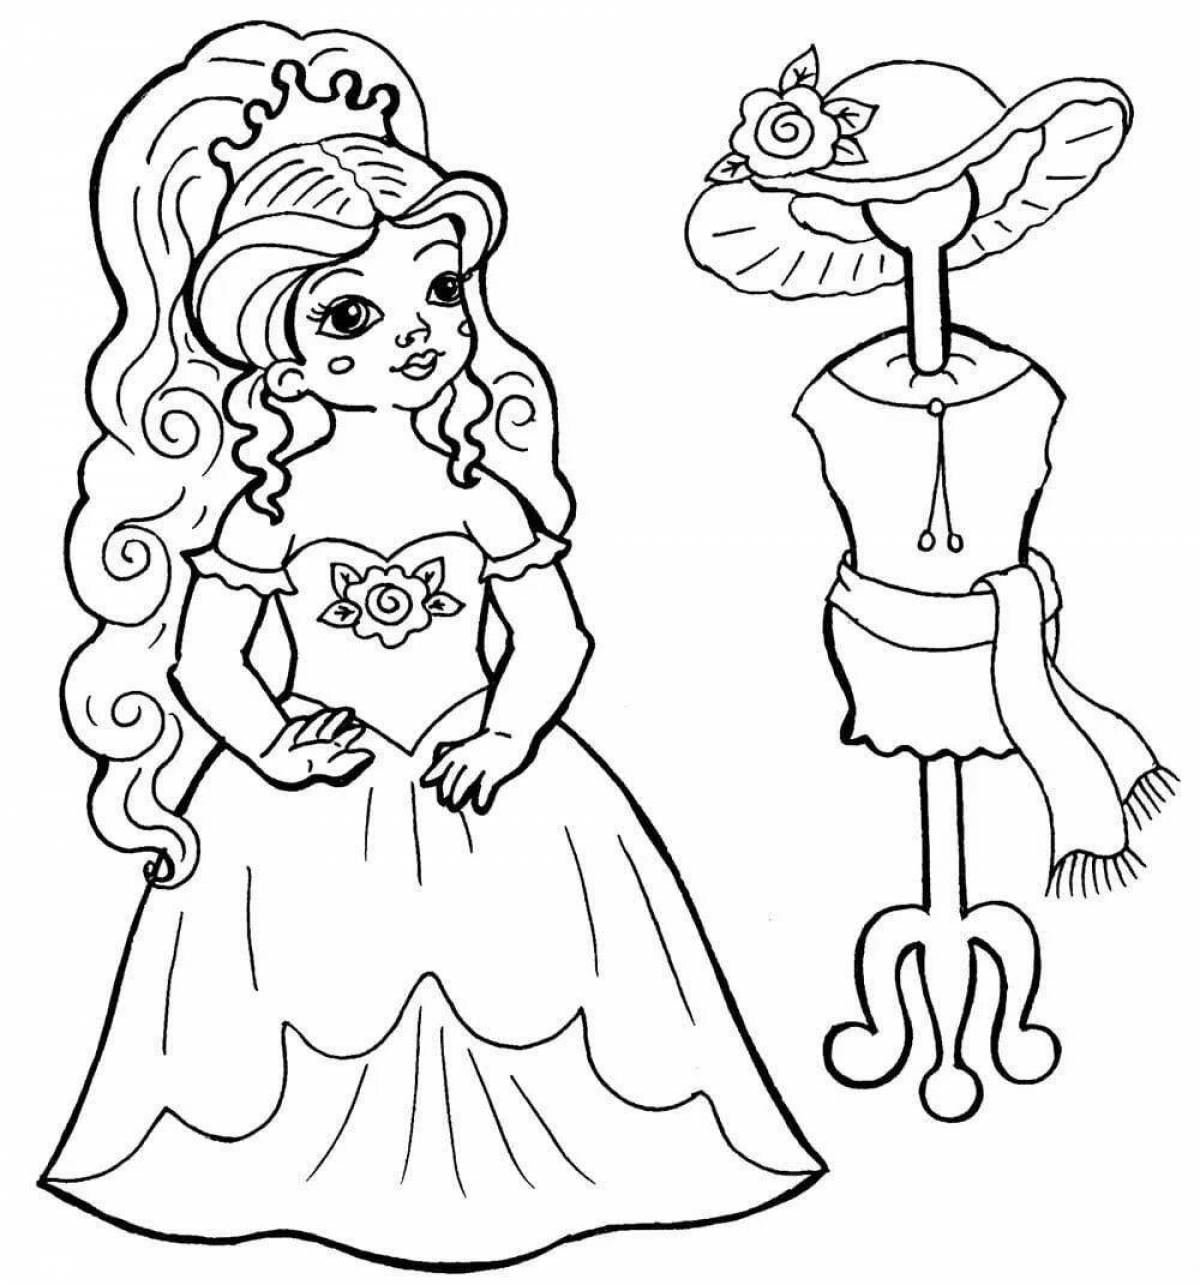 Fun coloring pages for 6 year old girls